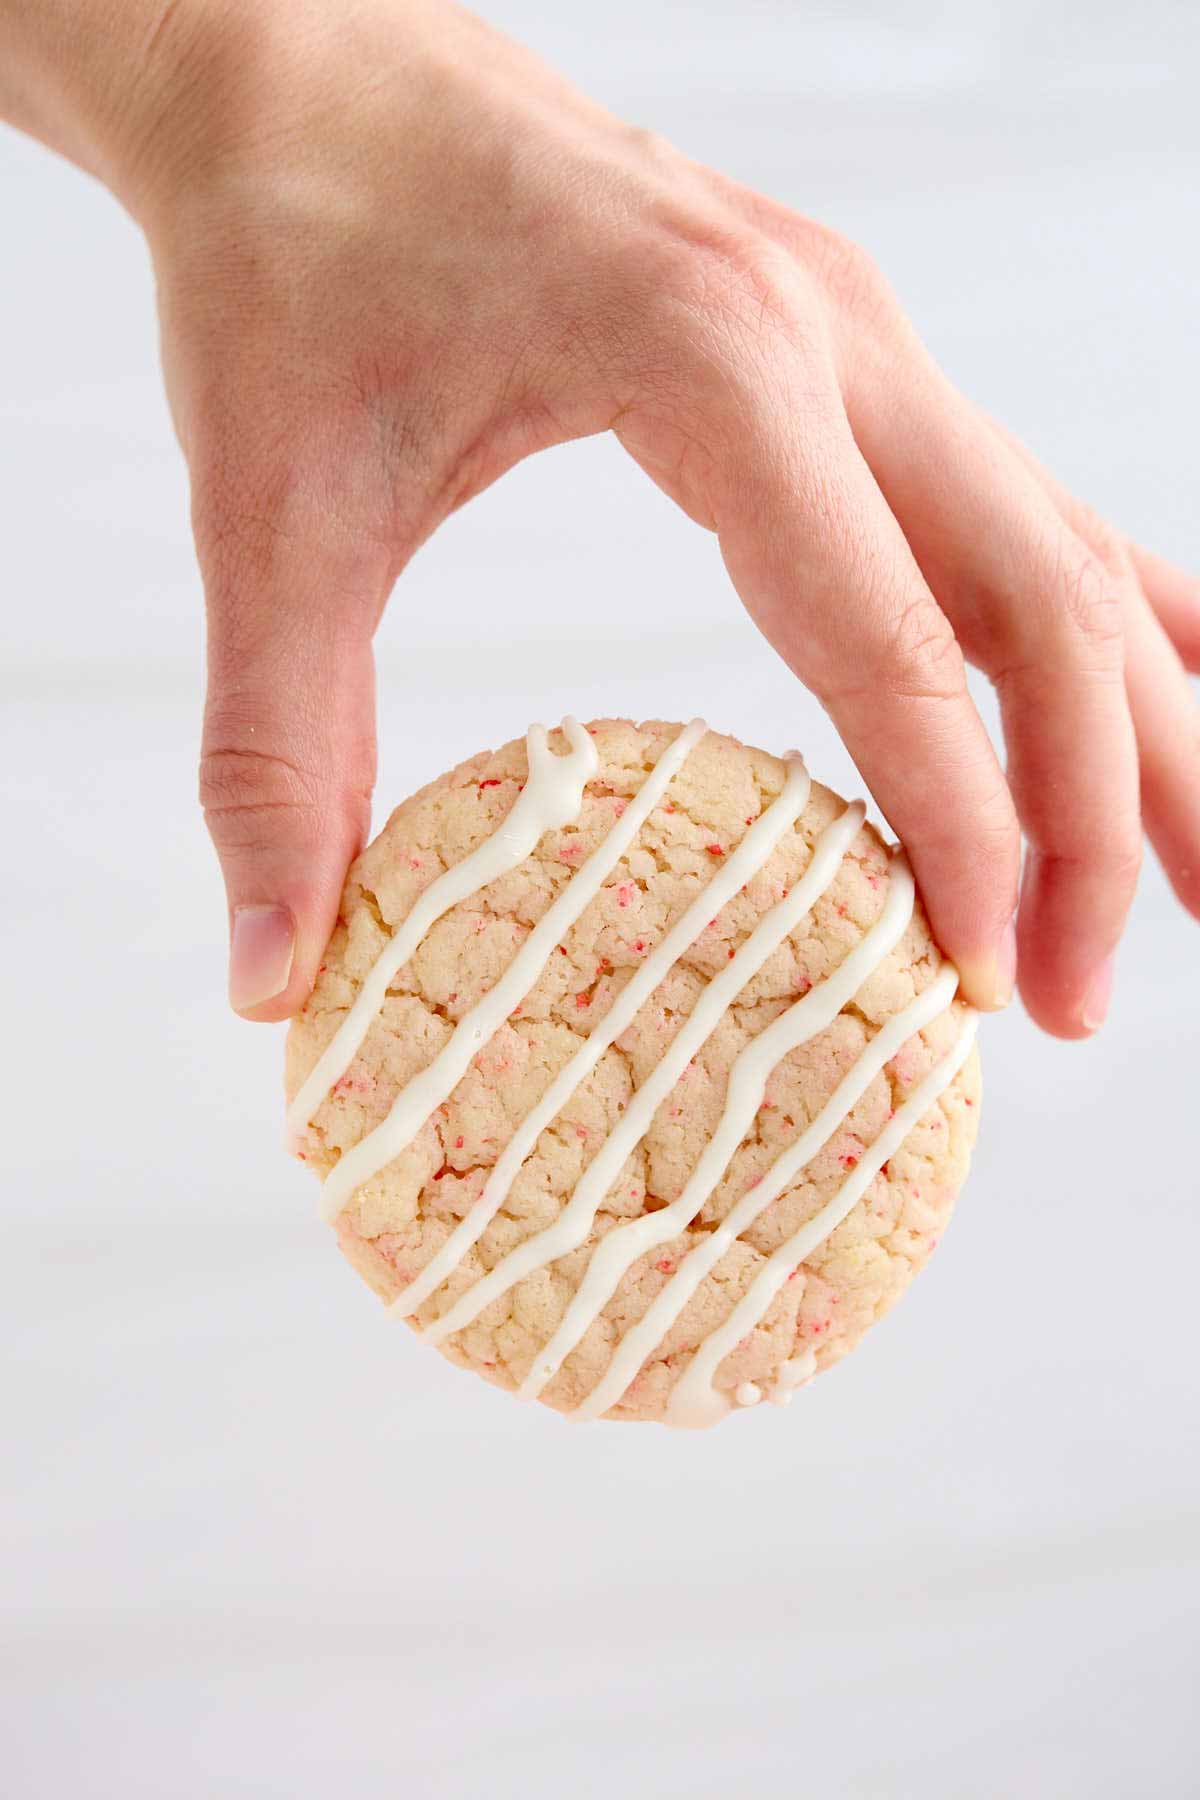 Fingers holding a white chocolate drizzled cherry chip cake mix cookie.